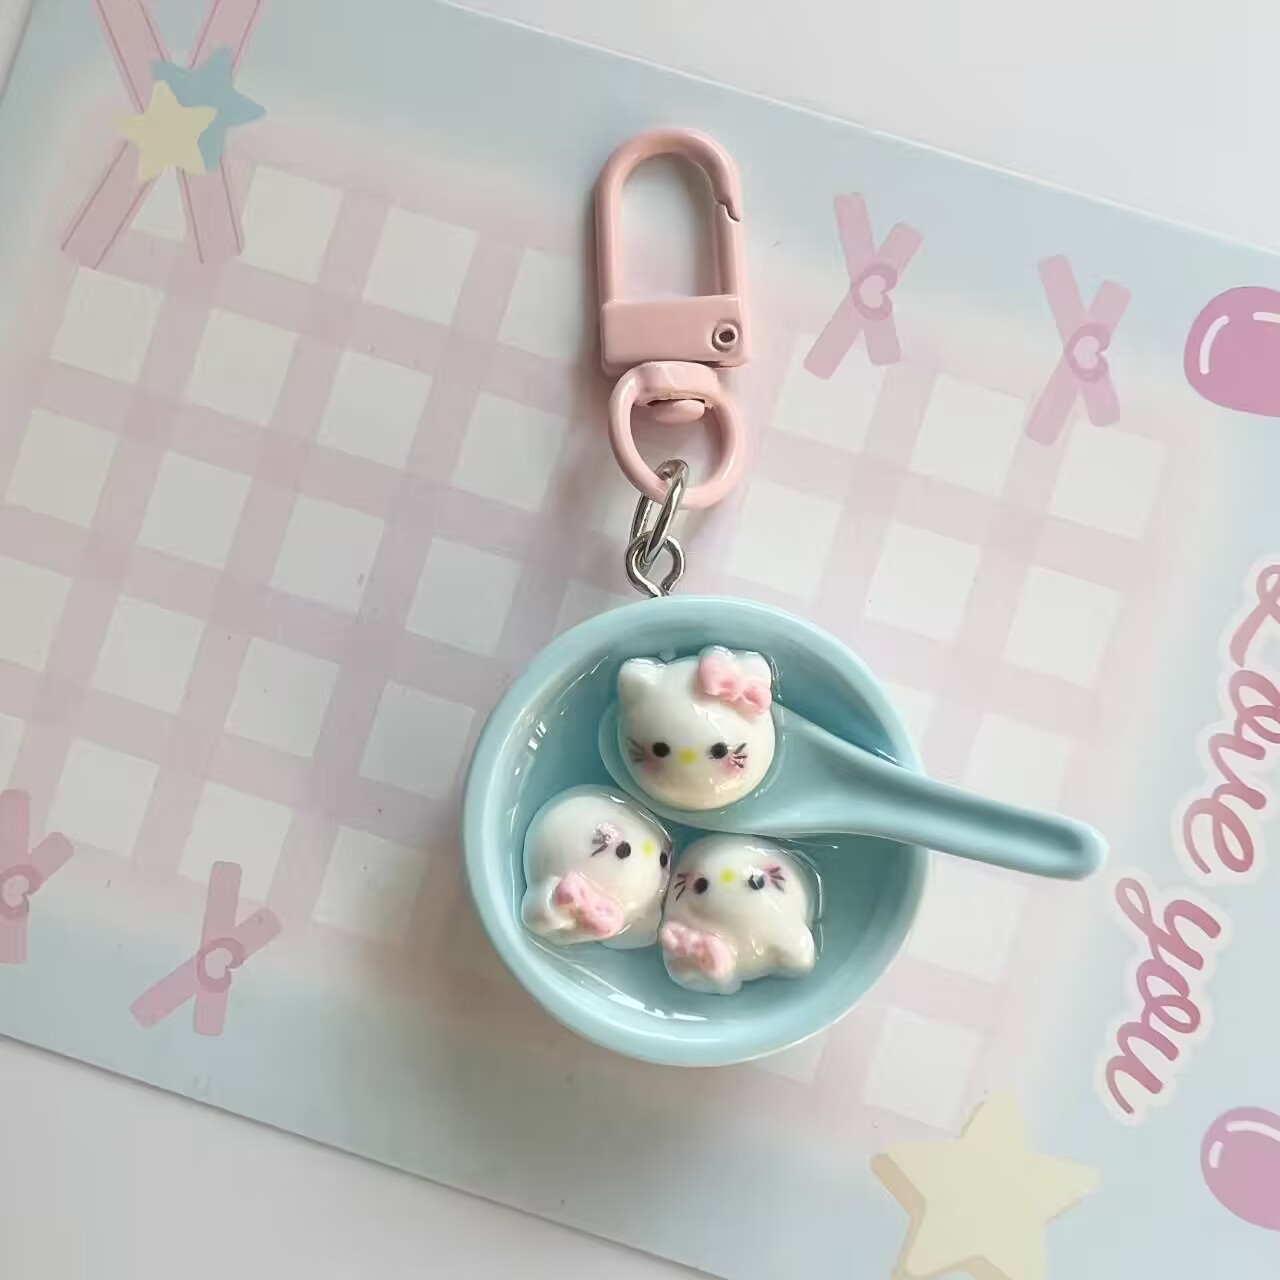 Sanrio Soup round Bowl Keychain Schoolbag Pendant Ins Girl Heart Cartoon Couple Girlfriends Gift Accessories Ornaments